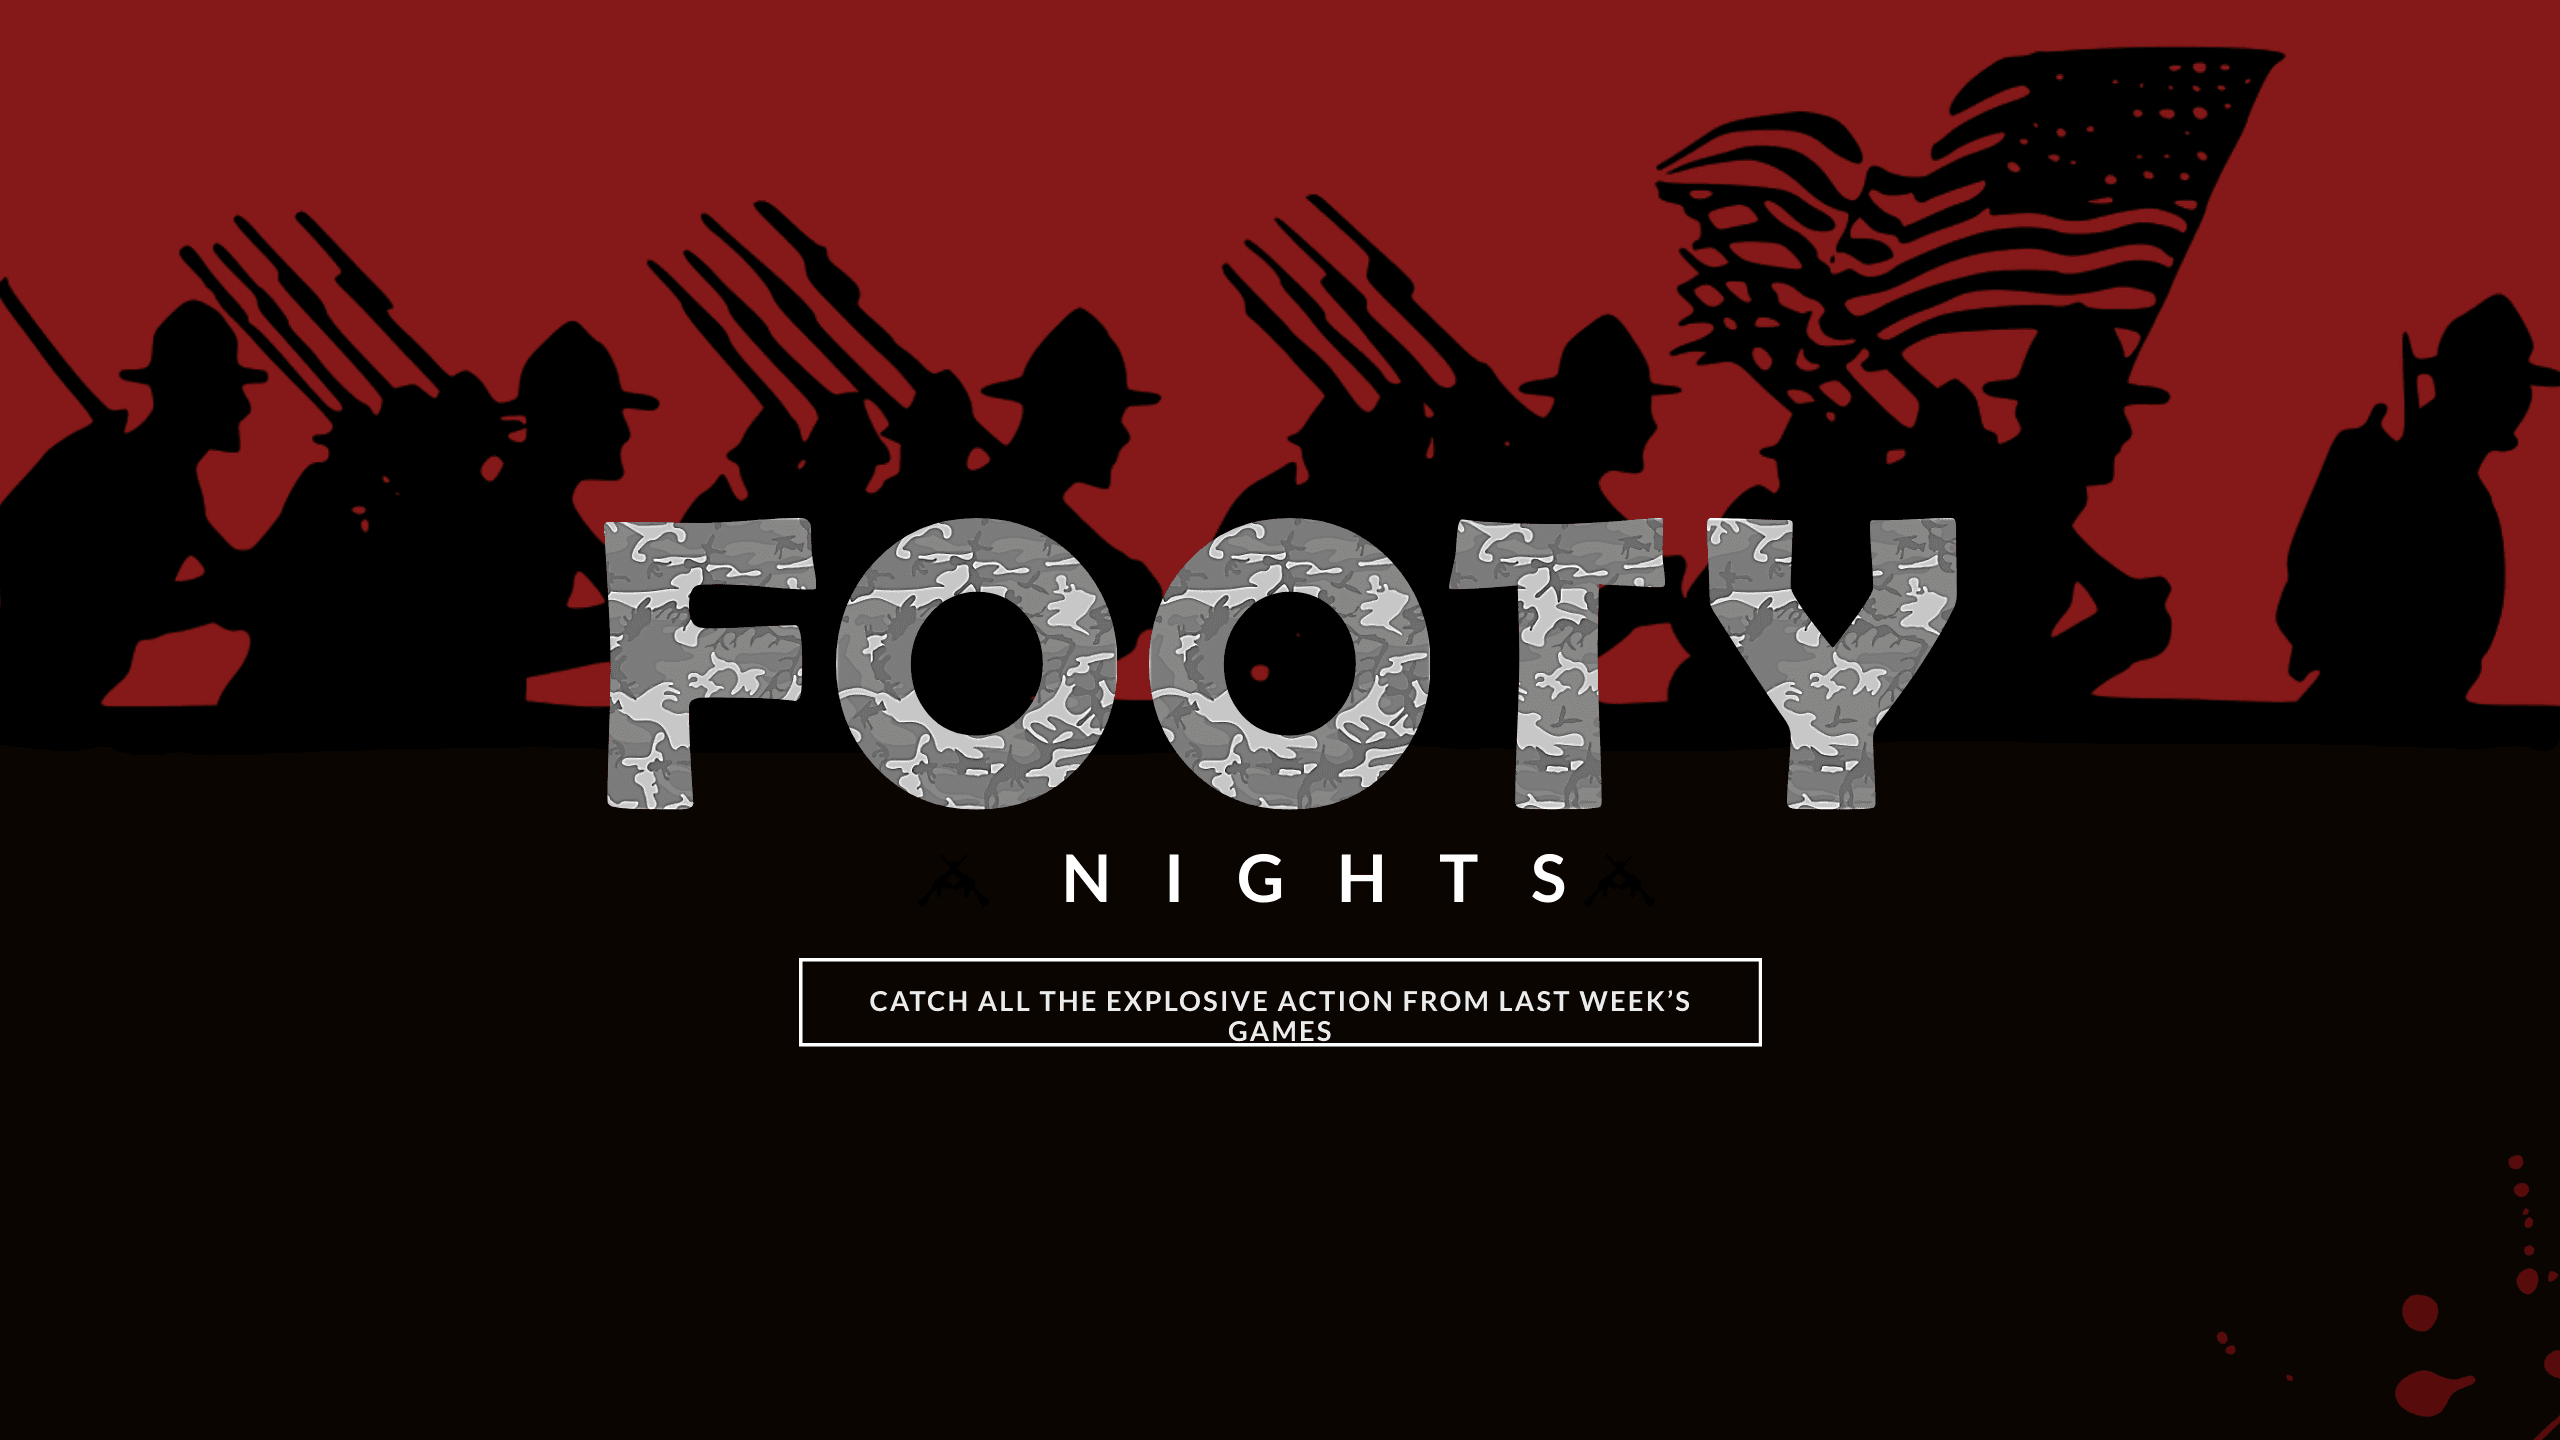 footy-nights-and-games-action-weekly-highlights-youtube-channel-art-thumbnail-img